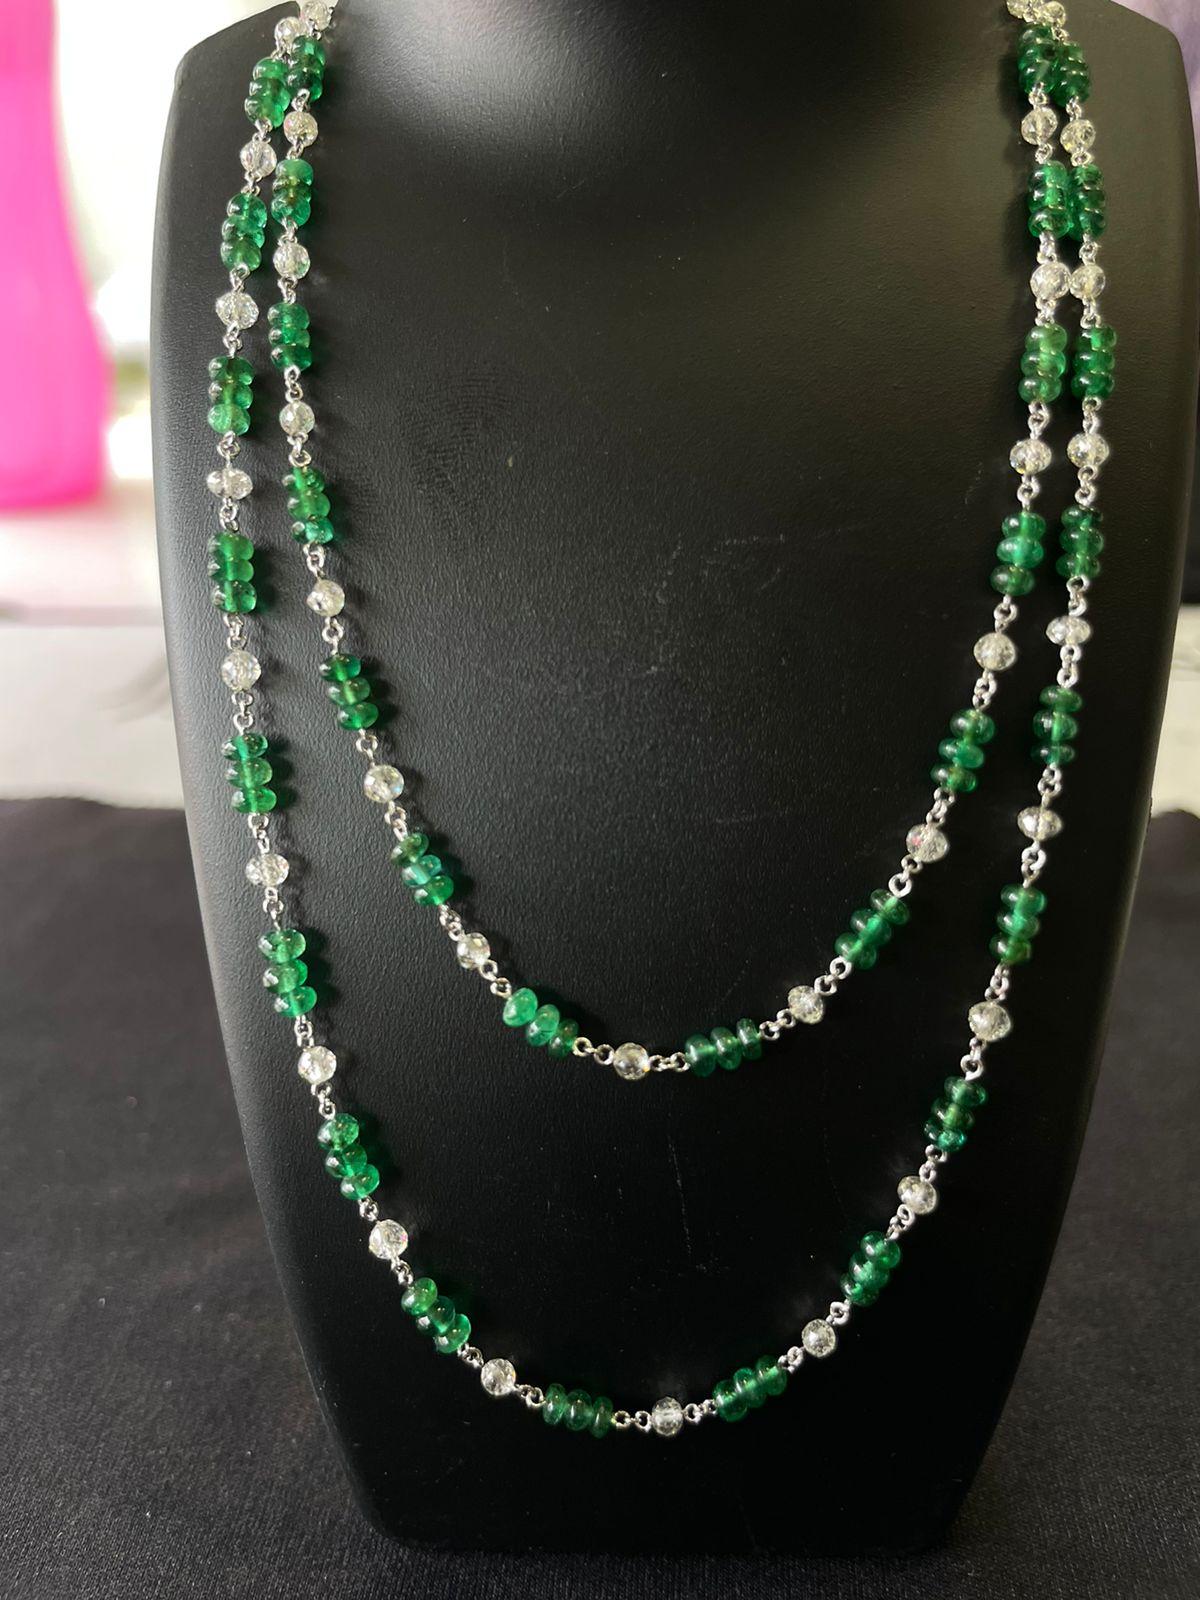 PANIM 18k White Gold Diamond Beads & Emerald Necklace

Diamond Beads & Natural Green Emeralds are used to embellish a delicate necklace ,everything fluidly flowing among one another, their hues enhancing one another's. Perfect as a gift for loved